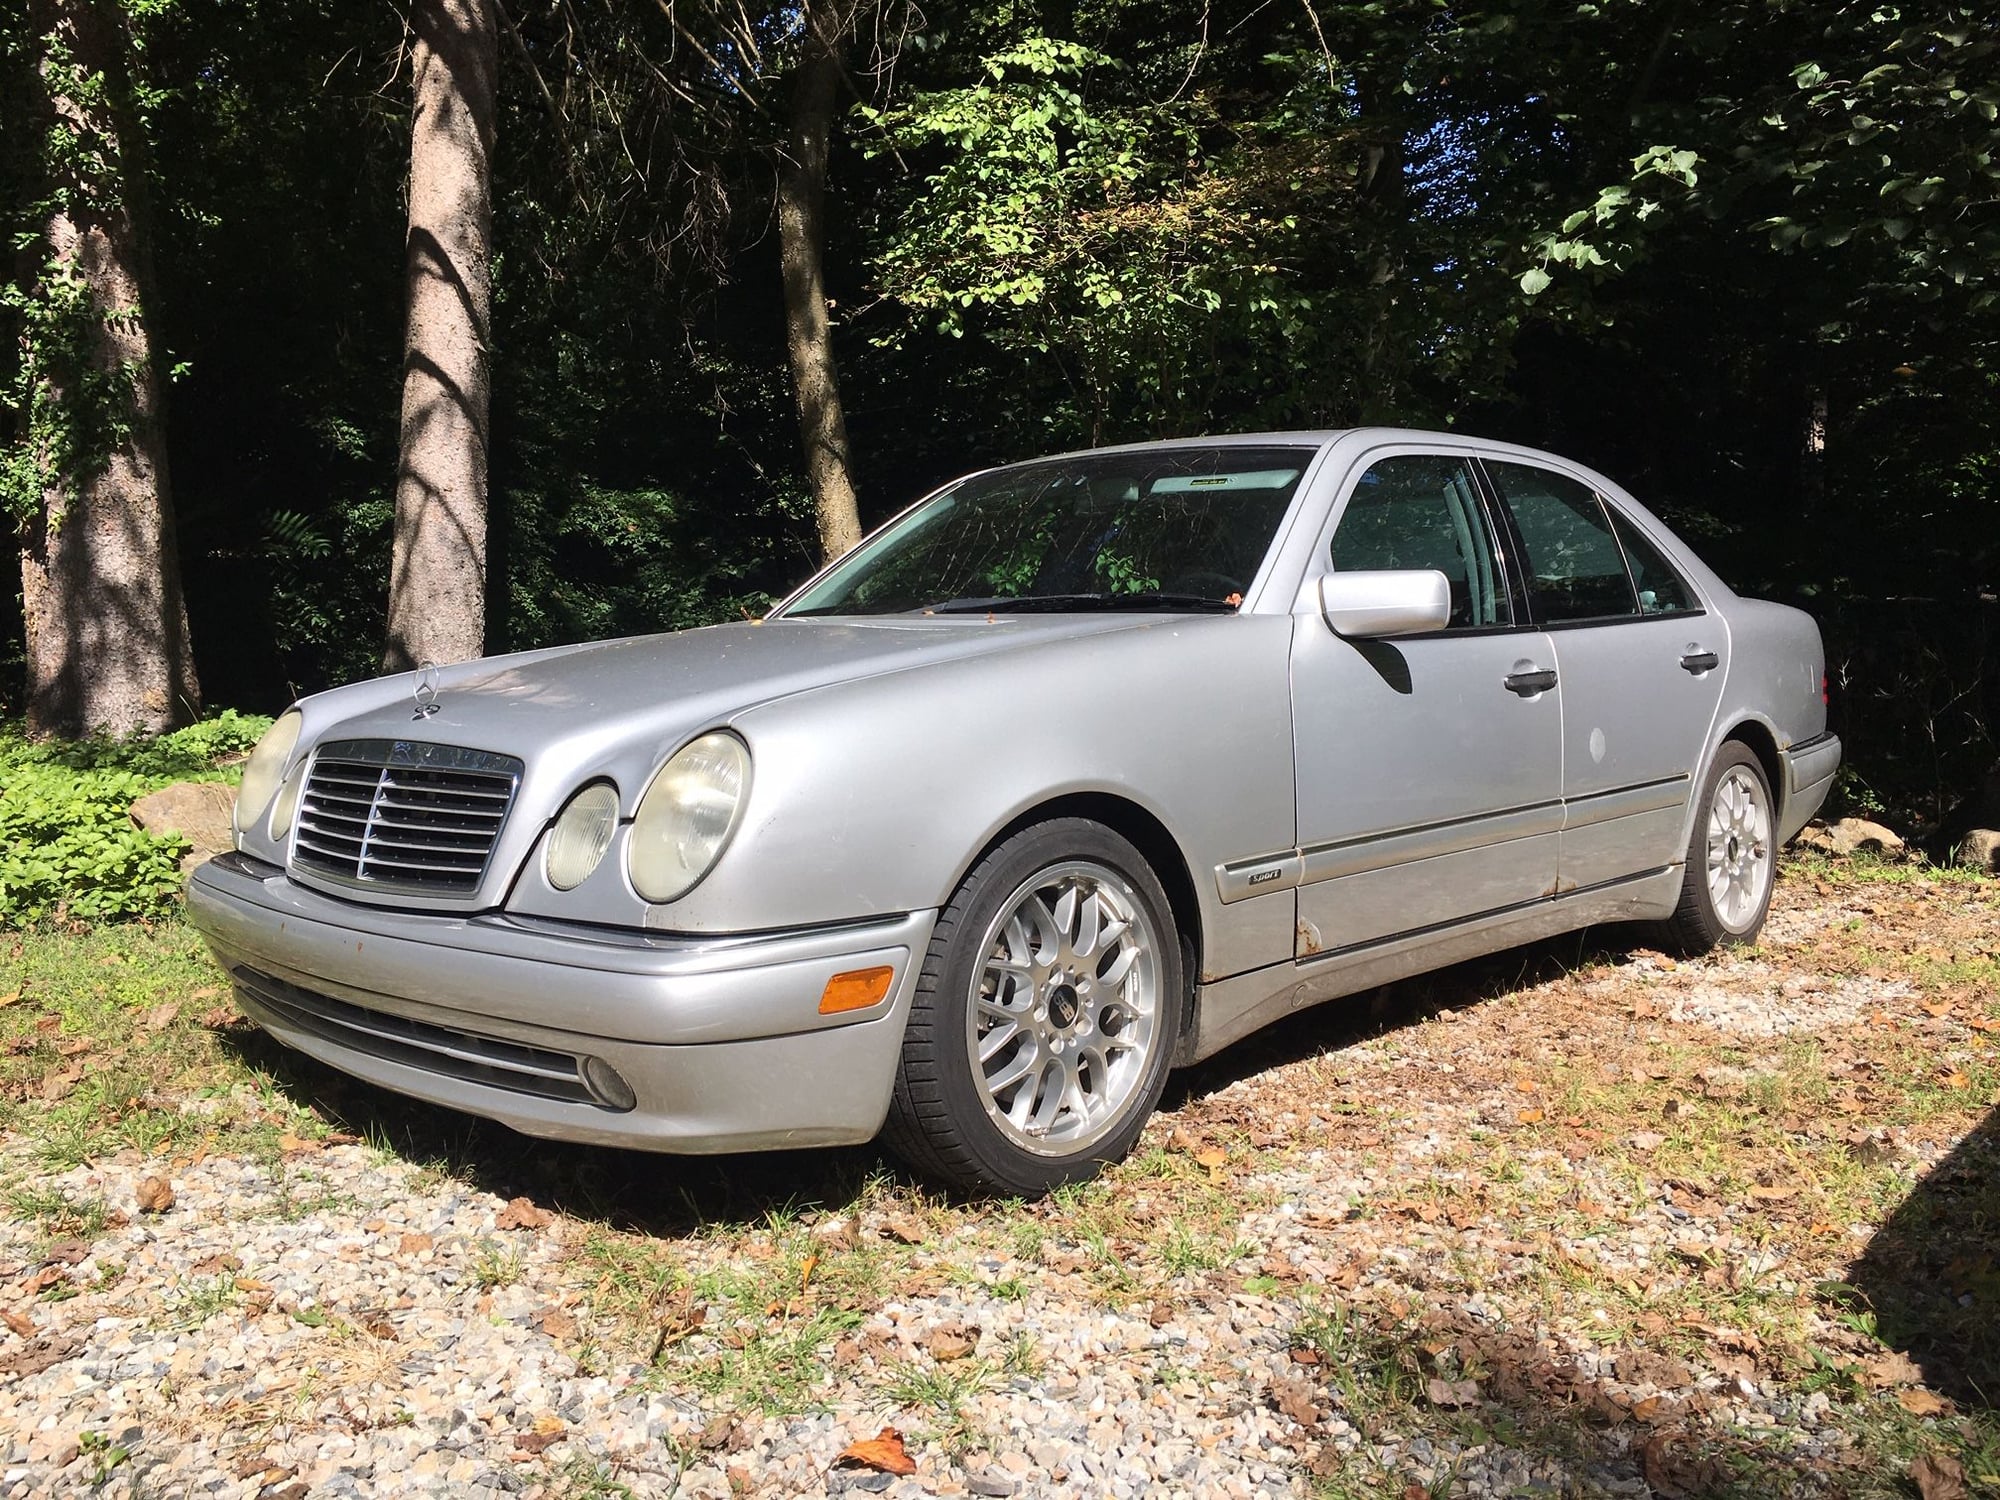 Exterior Body Parts - W210 1996-1999 AMG E55 Body Kit Brilliant Silver NYC area - Used - 1996 to 1999 Mercedes-Benz E55 AMG - Norwalk, CT 06854, United States